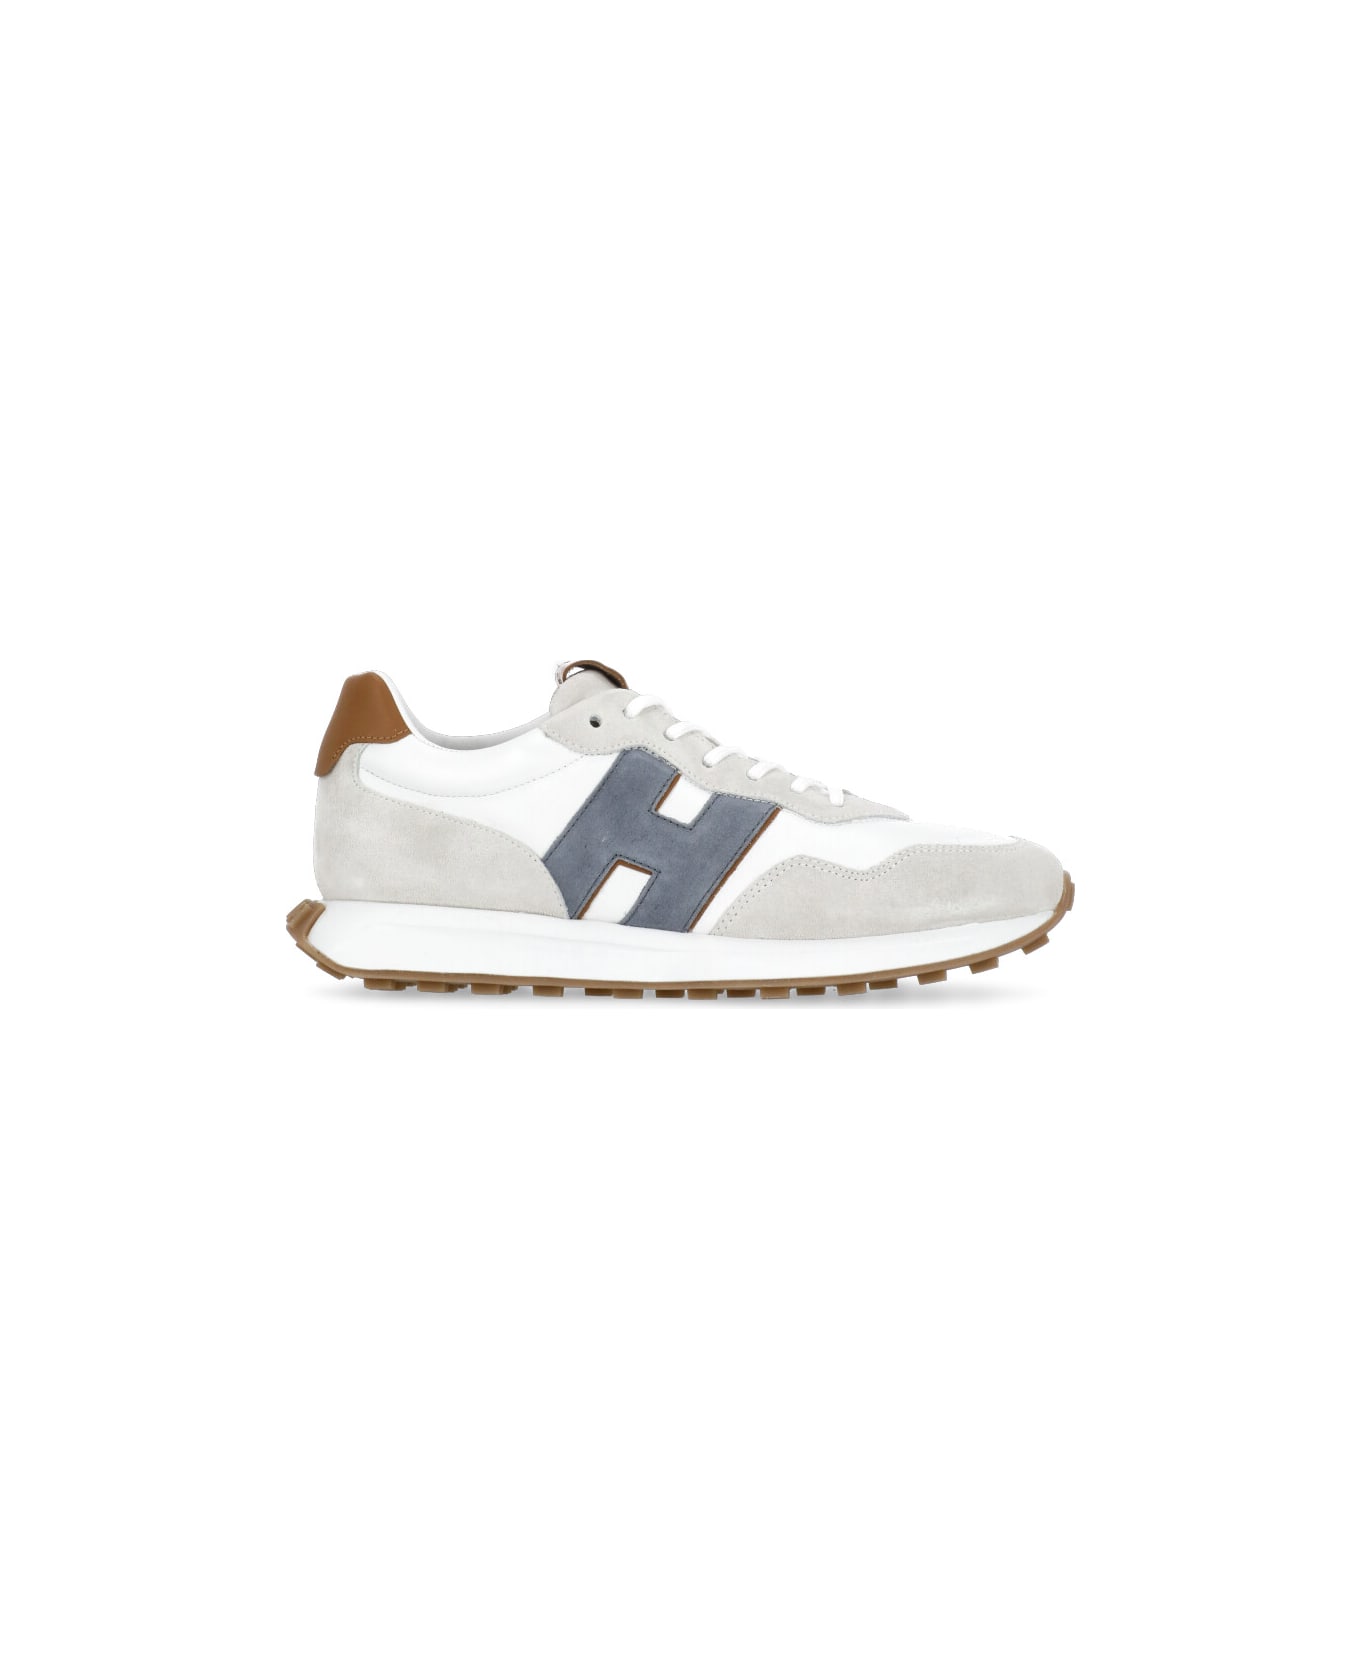 Hogan Lace-up Sneakers - White